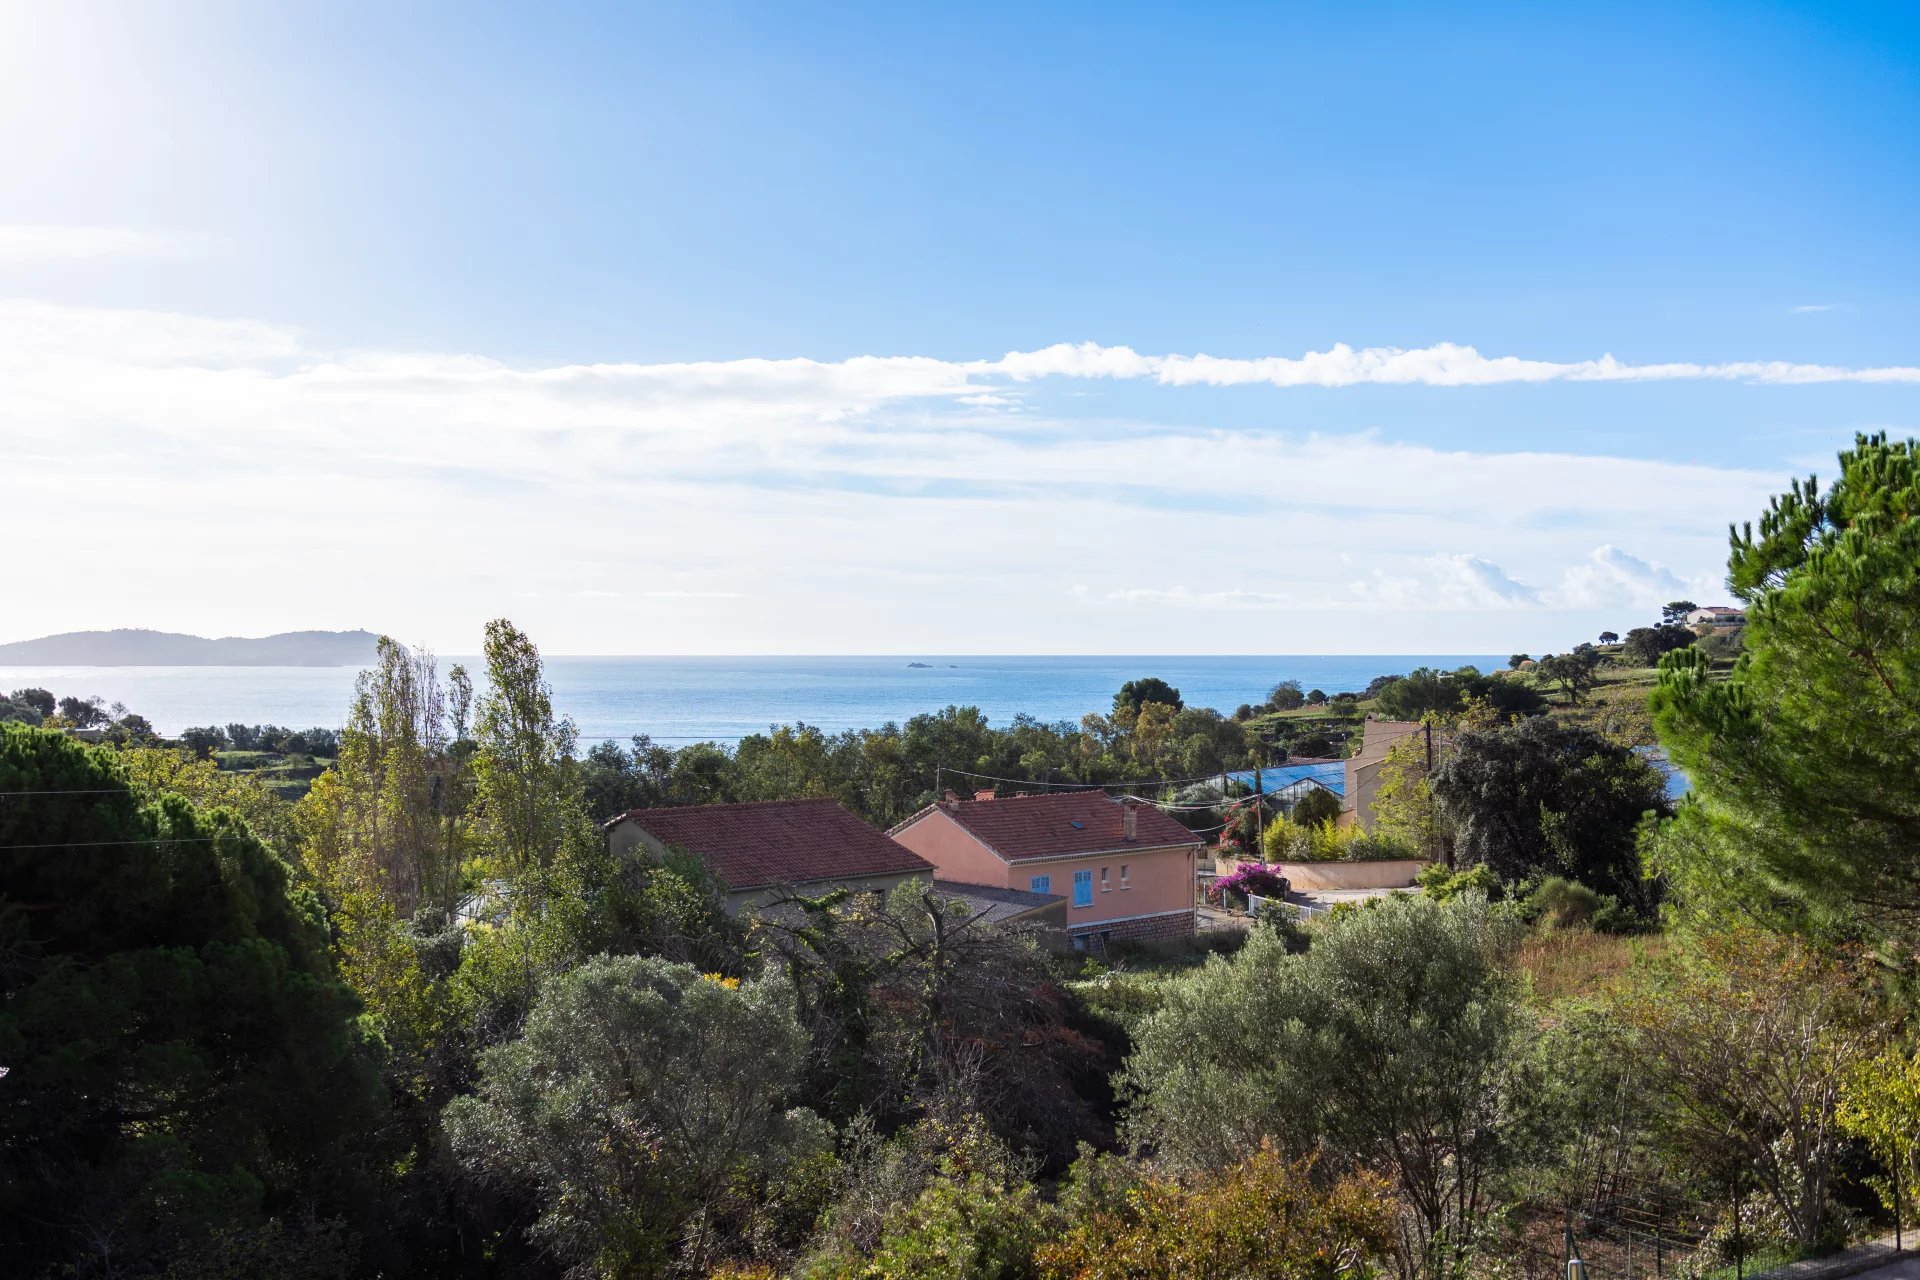 Exclusive to IMMOCOACH: Sea view villa in a countryside setting.